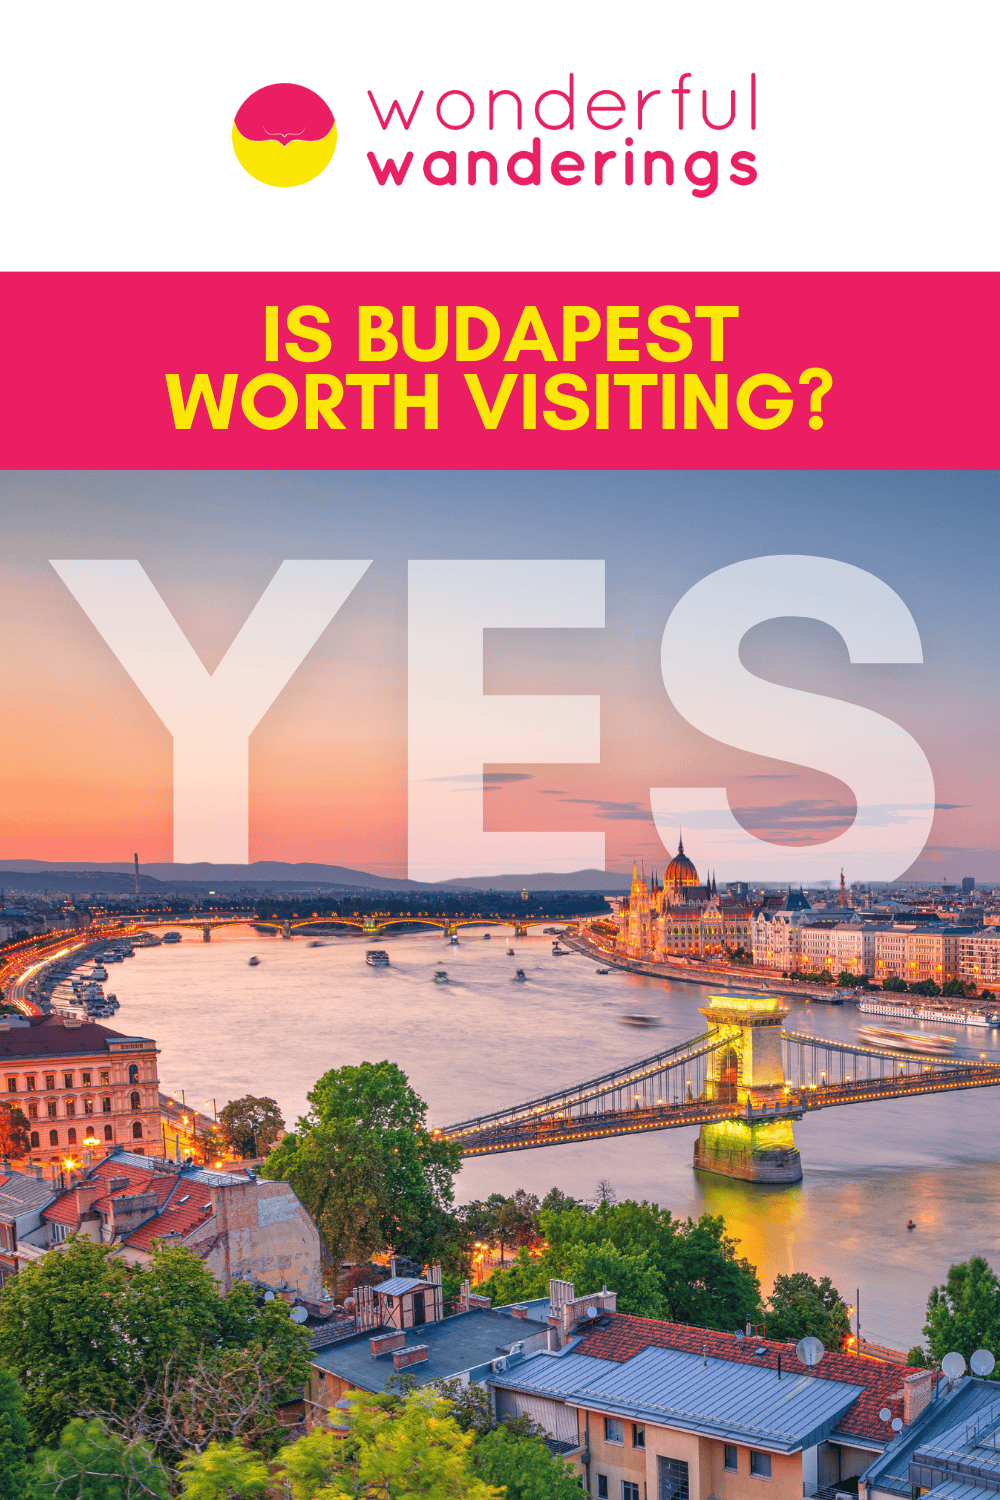 is budapest worth visiting?